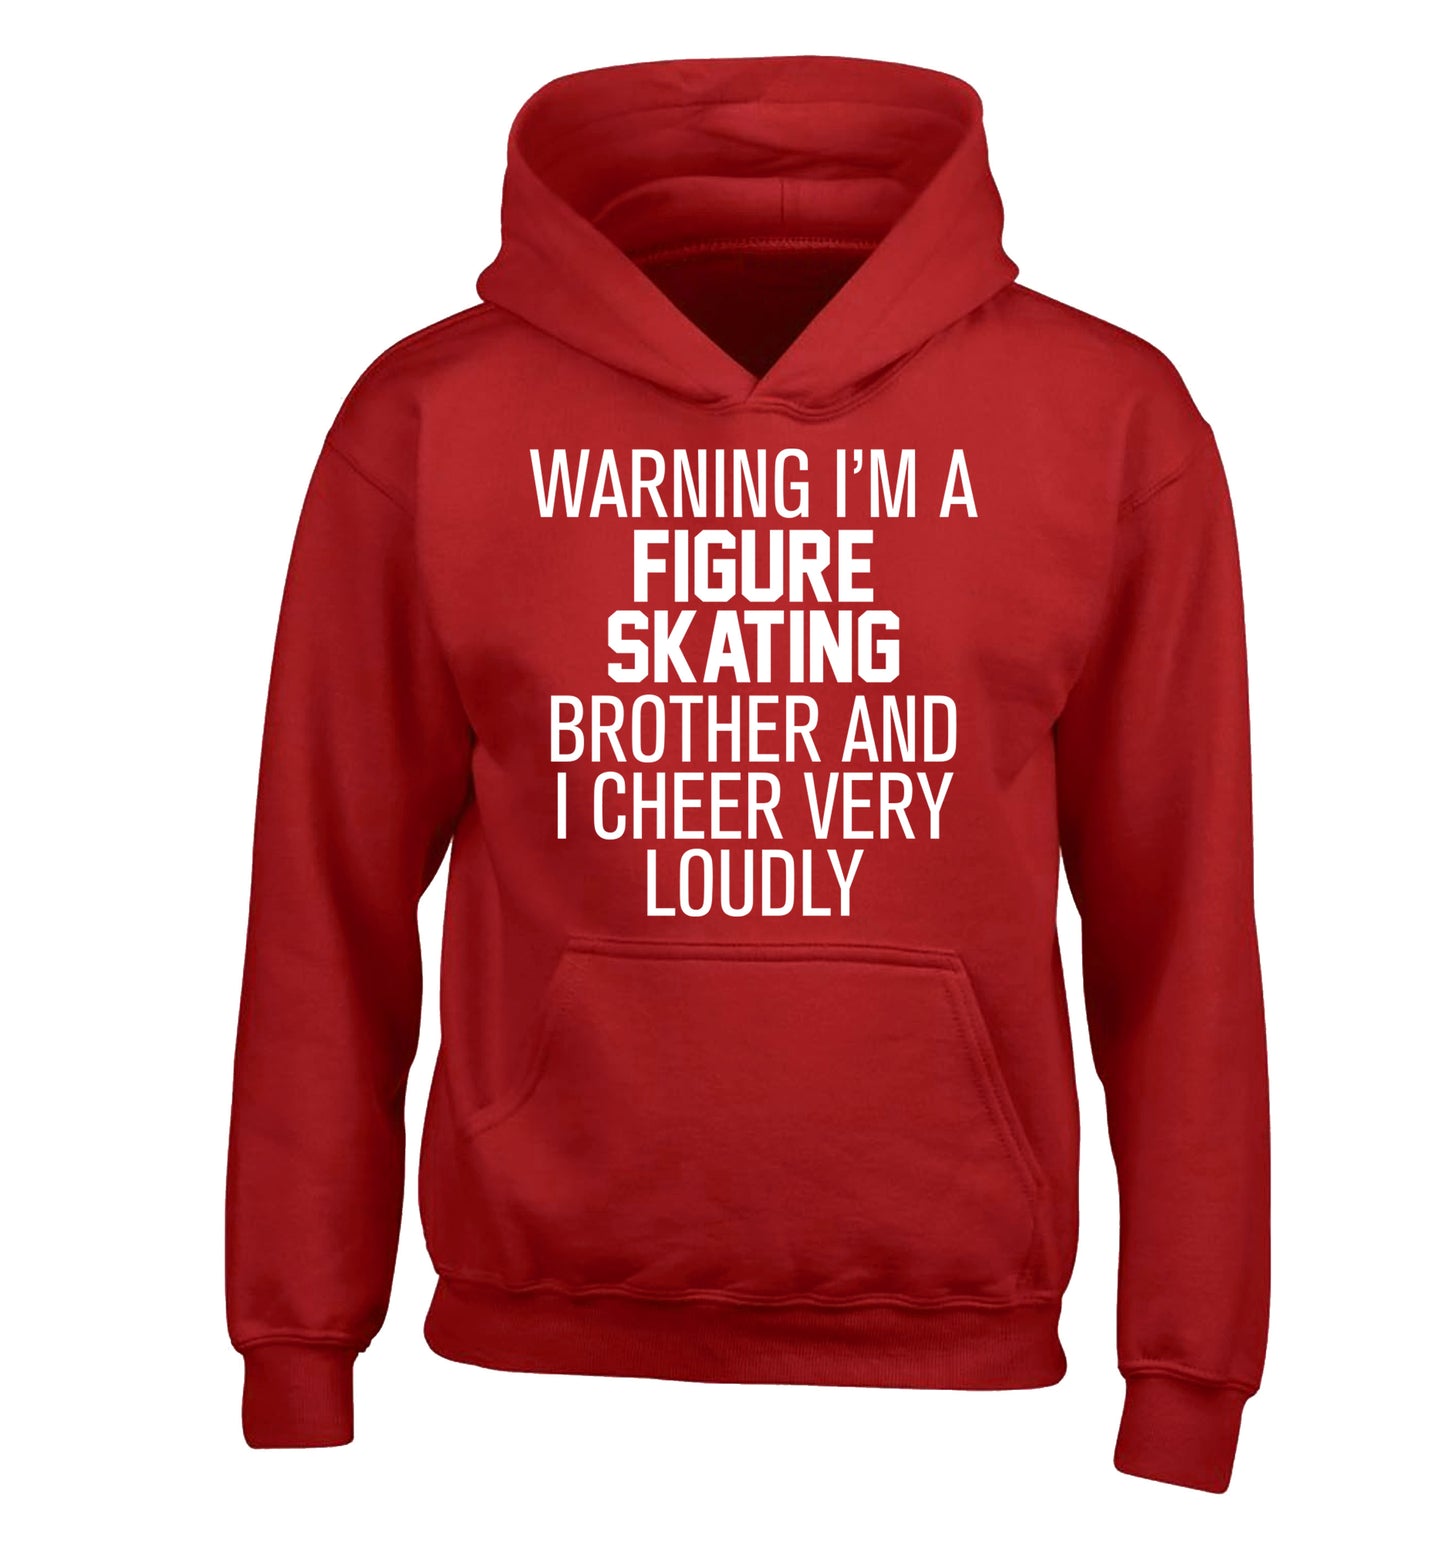 Warning I'm a figure skating brother and I cheer very loudly children's red hoodie 12-14 Years